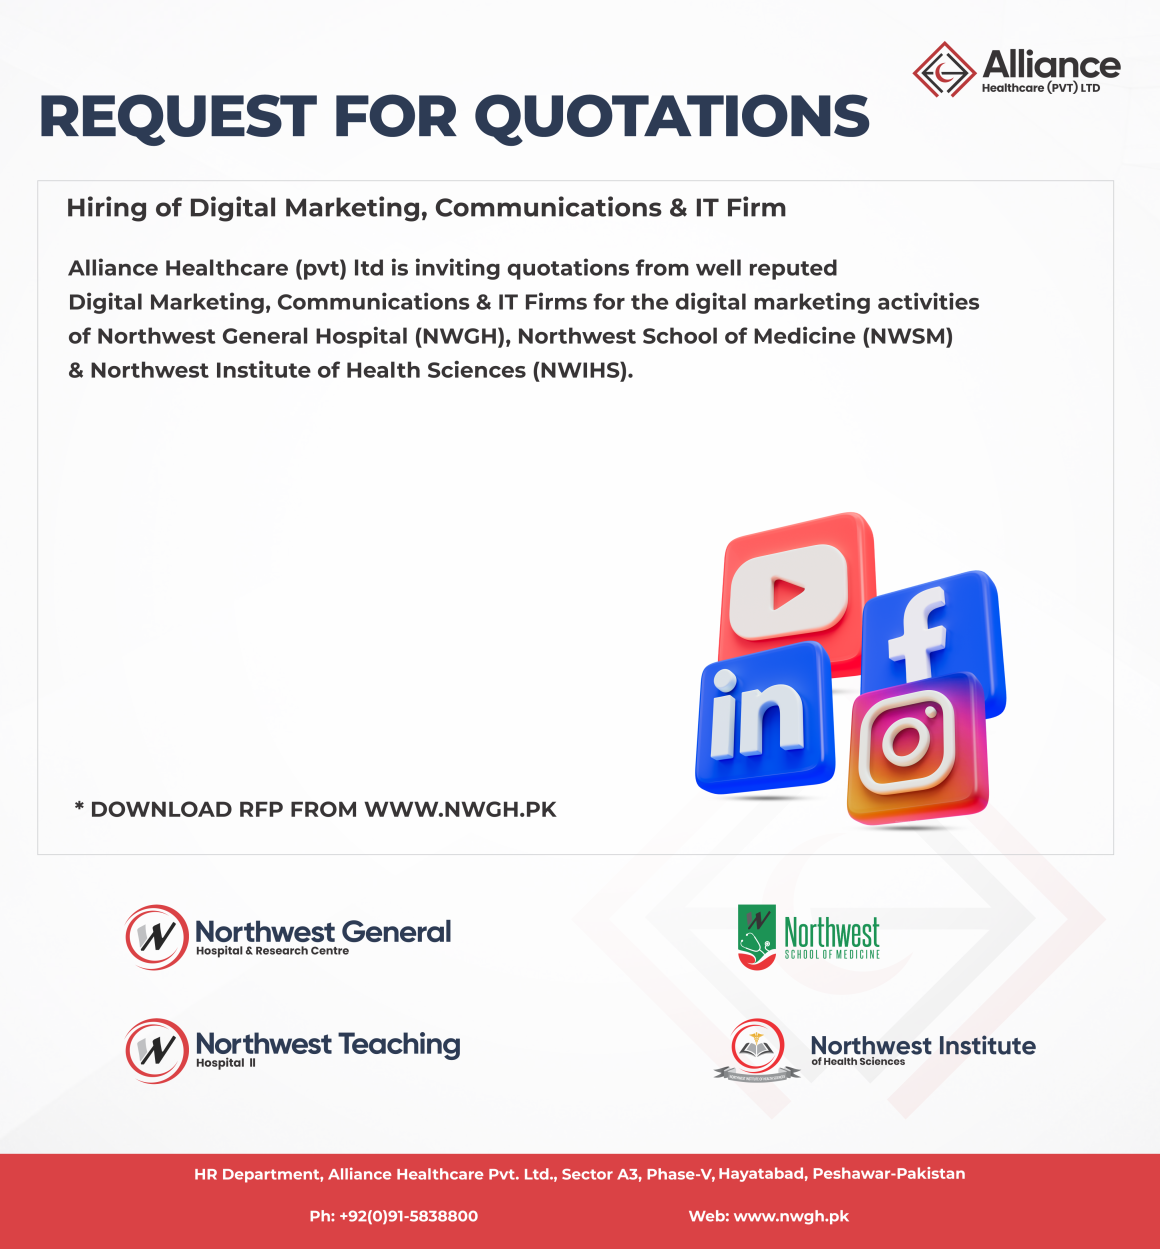 Request for Quotation – Hiring of Digital Marketing, Communications & IT Firm